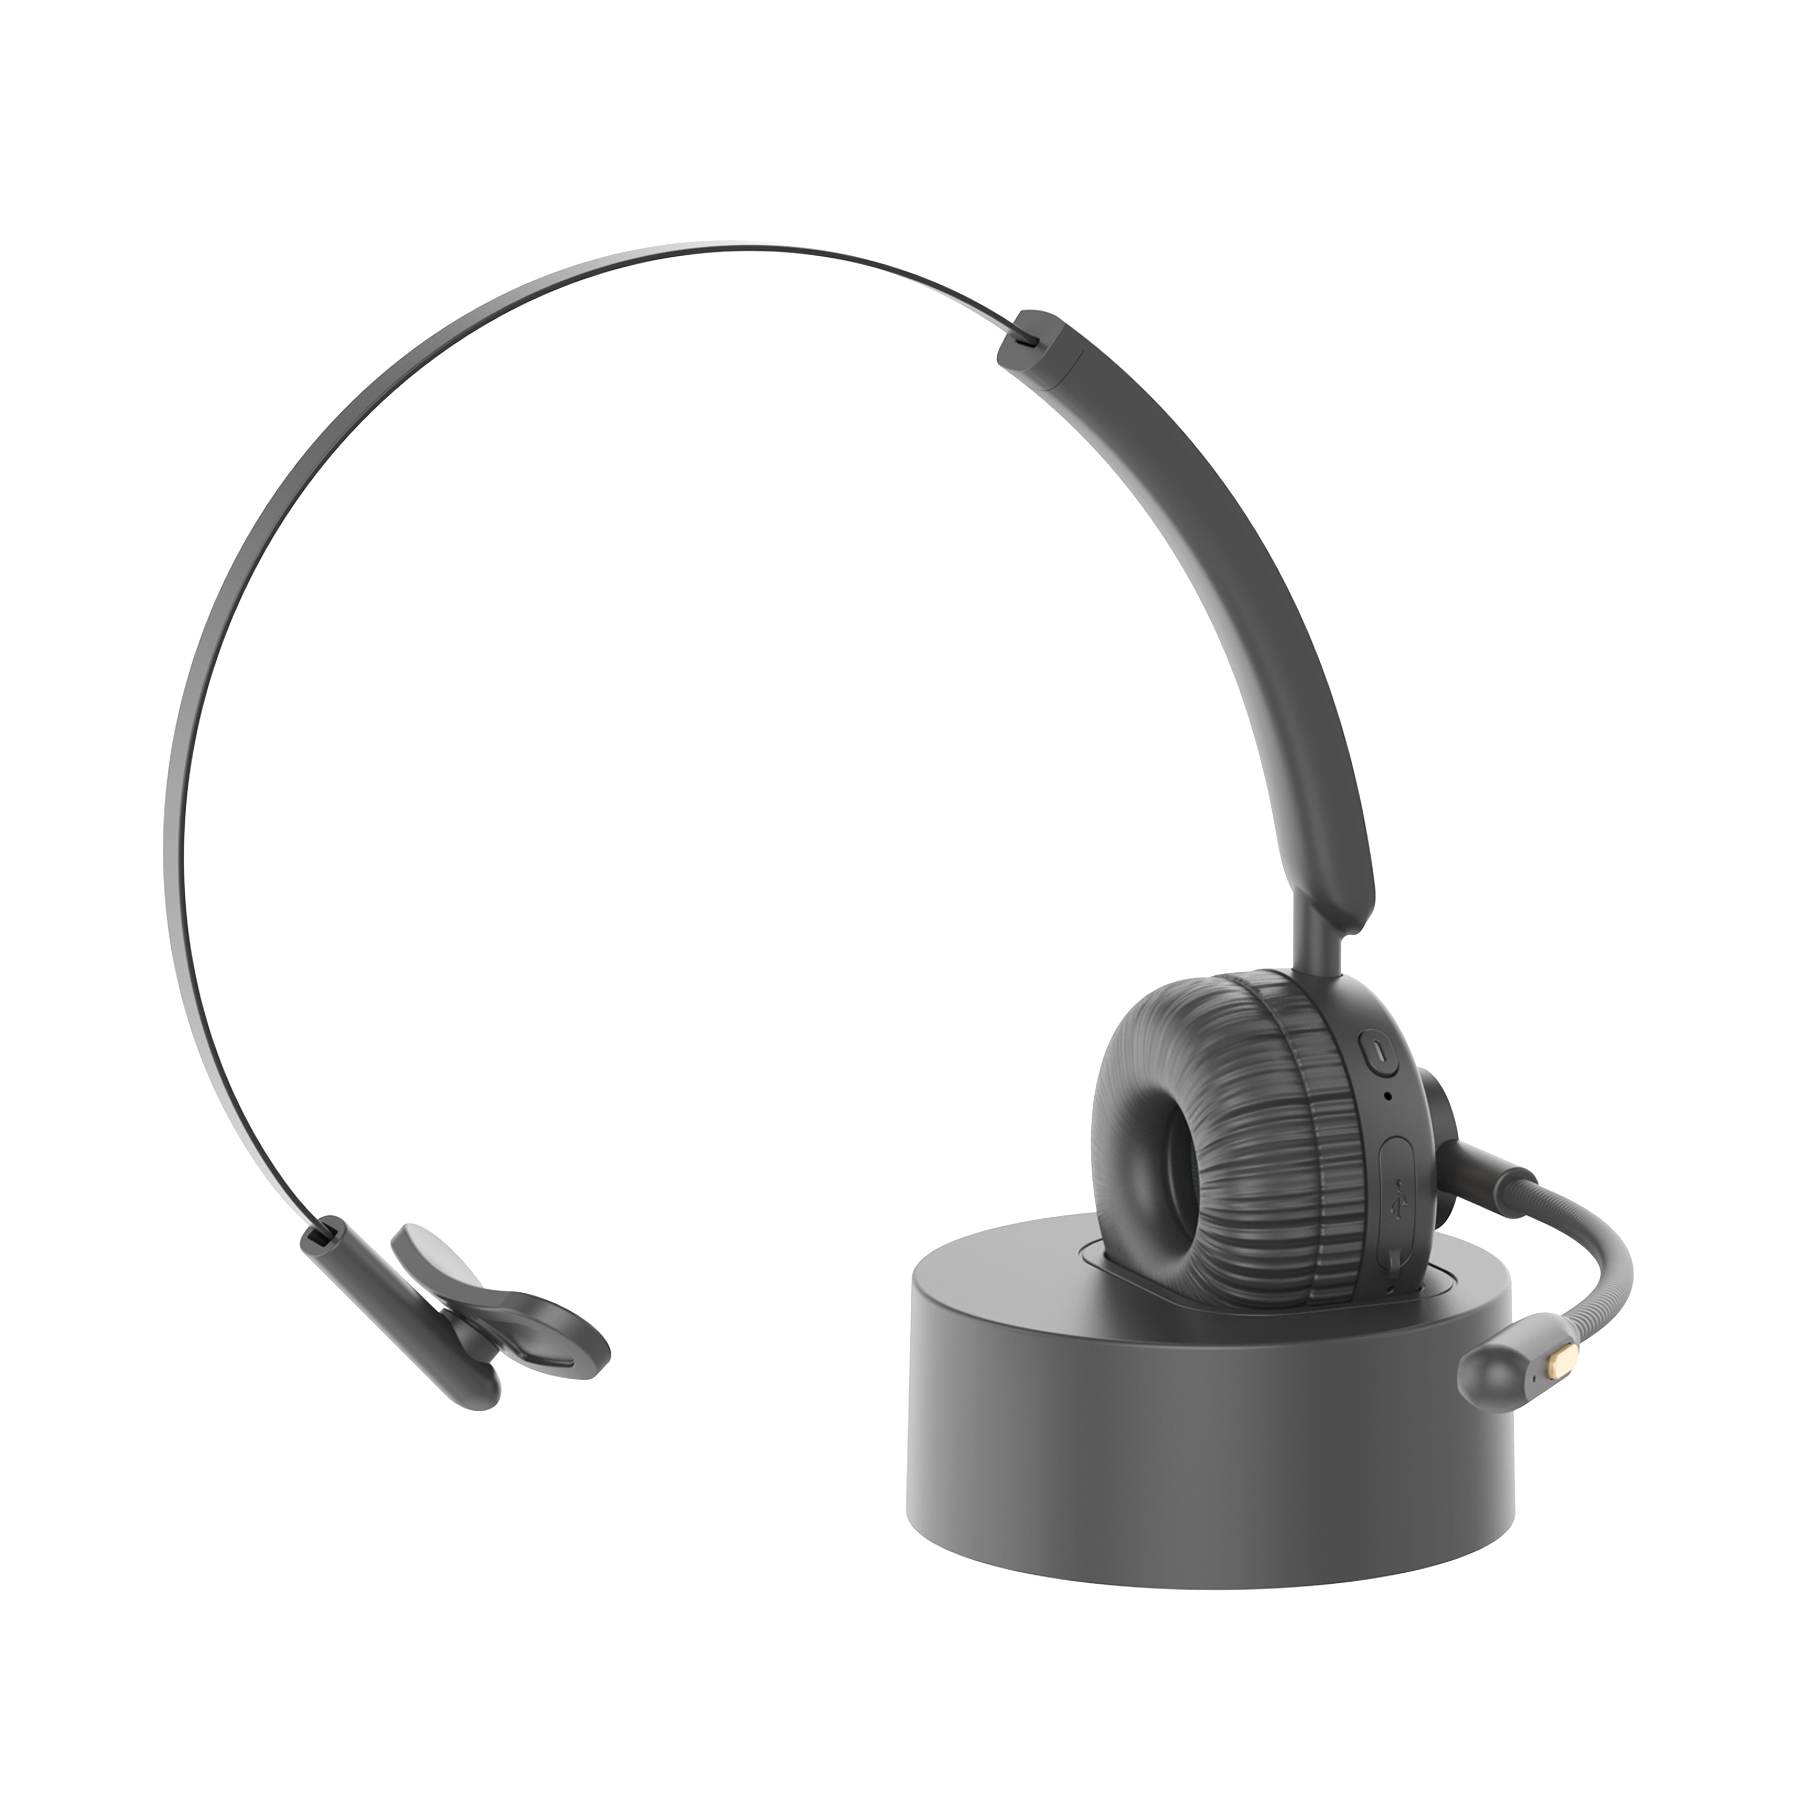 Wireless Headsets for The Office